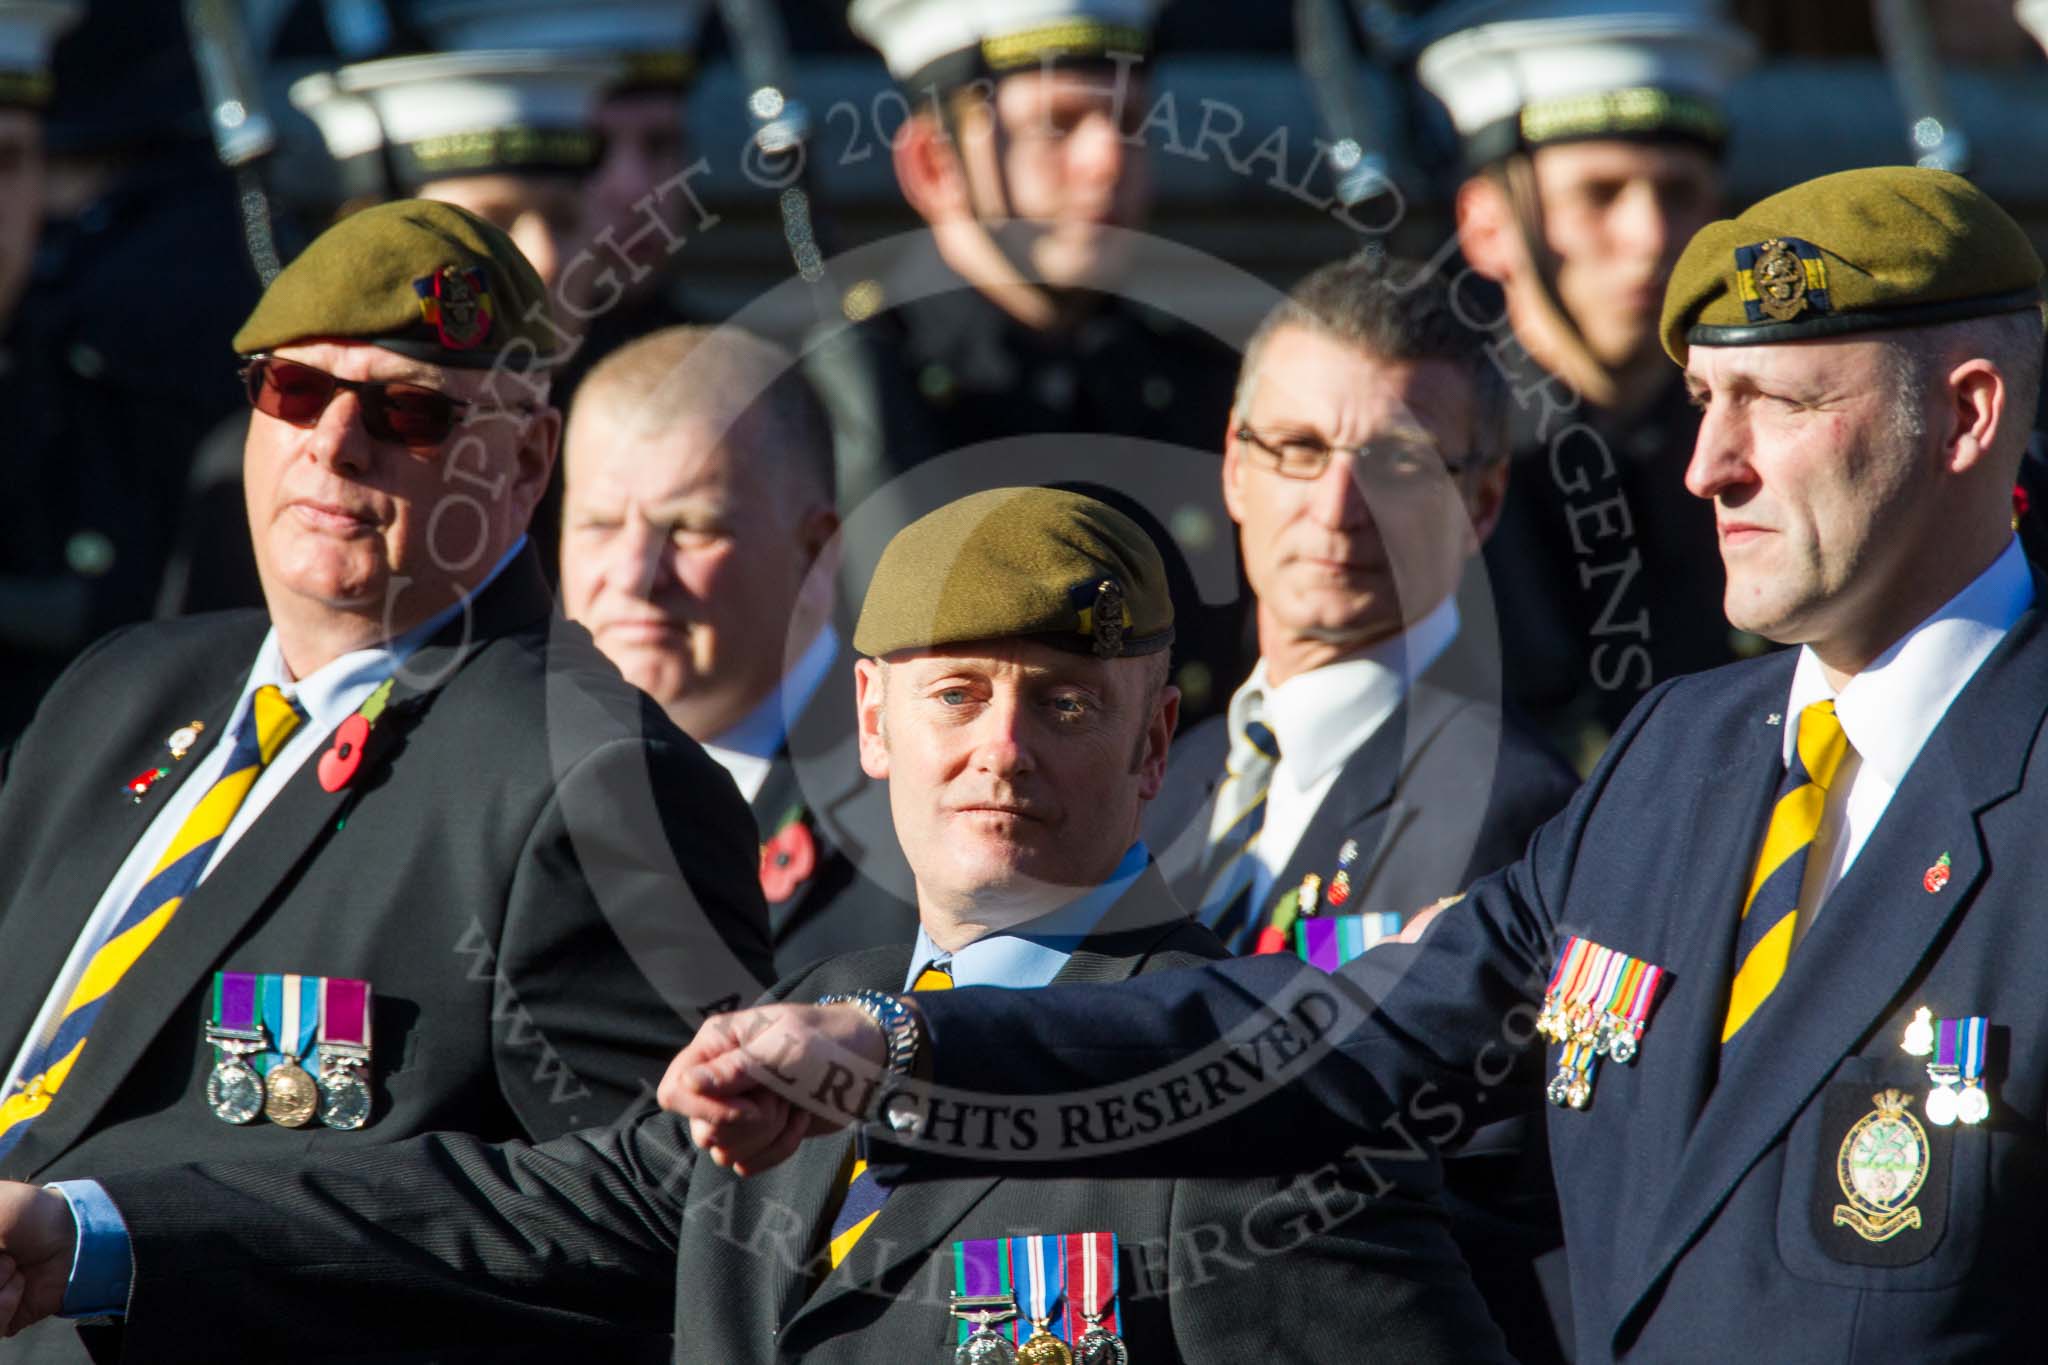 Remembrance Sunday at the Cenotaph in London 2014: Group A23 - Royal East Kent Regiment (The Buffs) Past & Present
Association.
Press stand opposite the Foreign Office building, Whitehall, London SW1,
London,
Greater London,
United Kingdom,
on 09 November 2014 at 12:04, image #1358